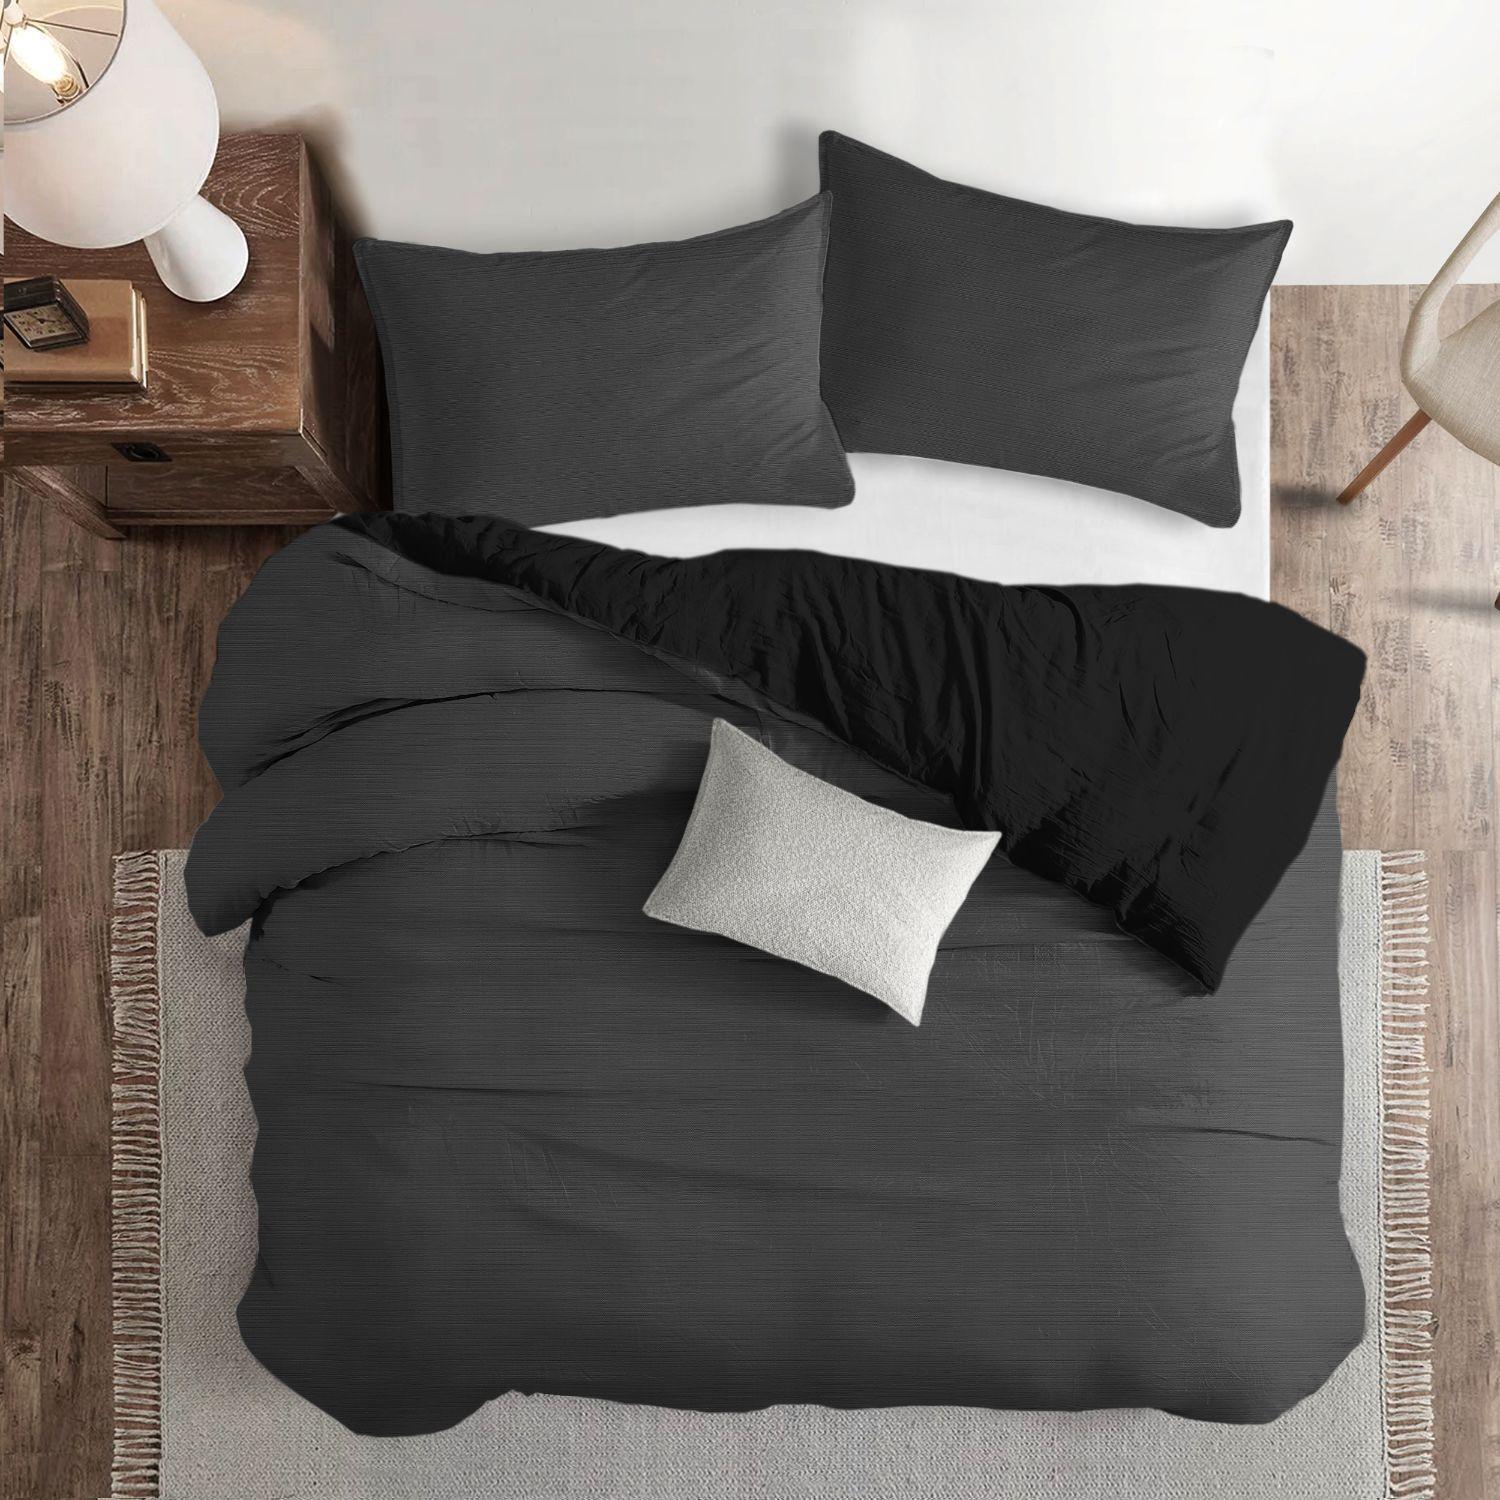 Set of 3 Charcoal Black Solid Comforter with Pillow Shams - King Size alternate image